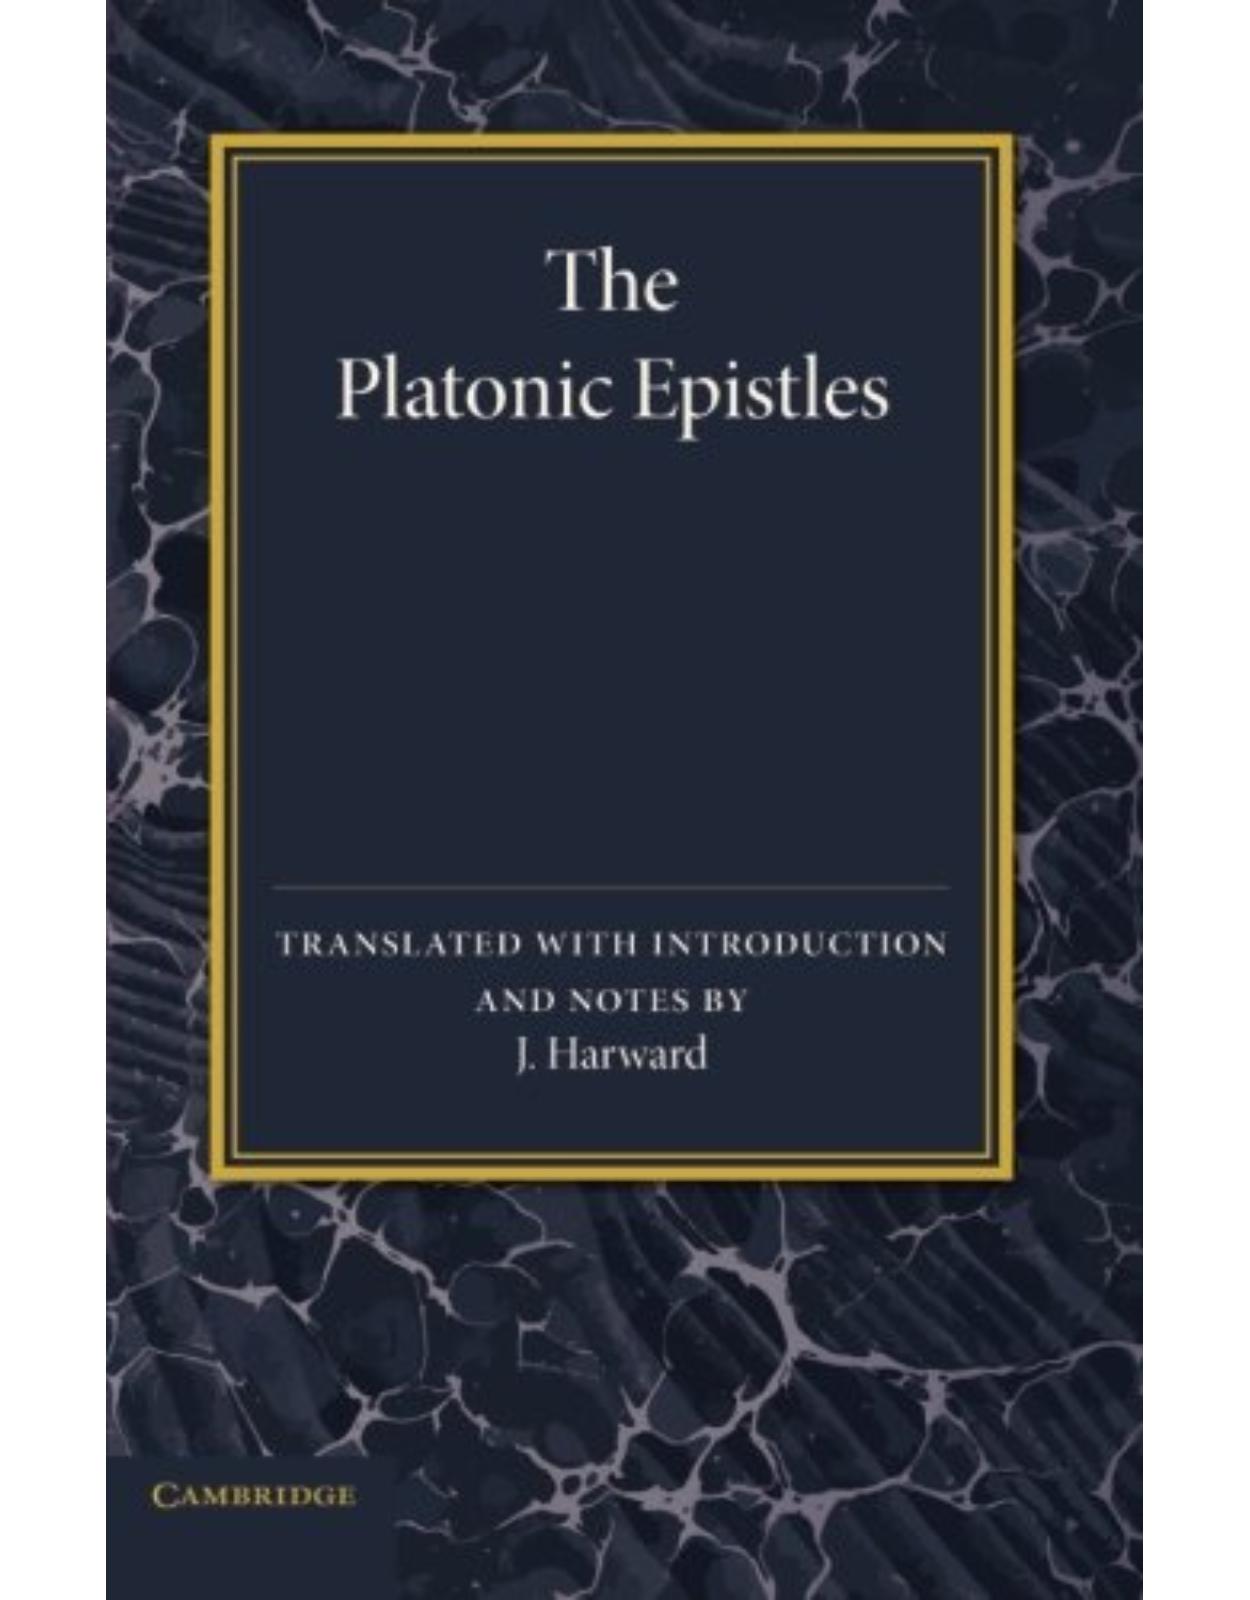 The Platonic Epistles: Translated with Introduction and Notes